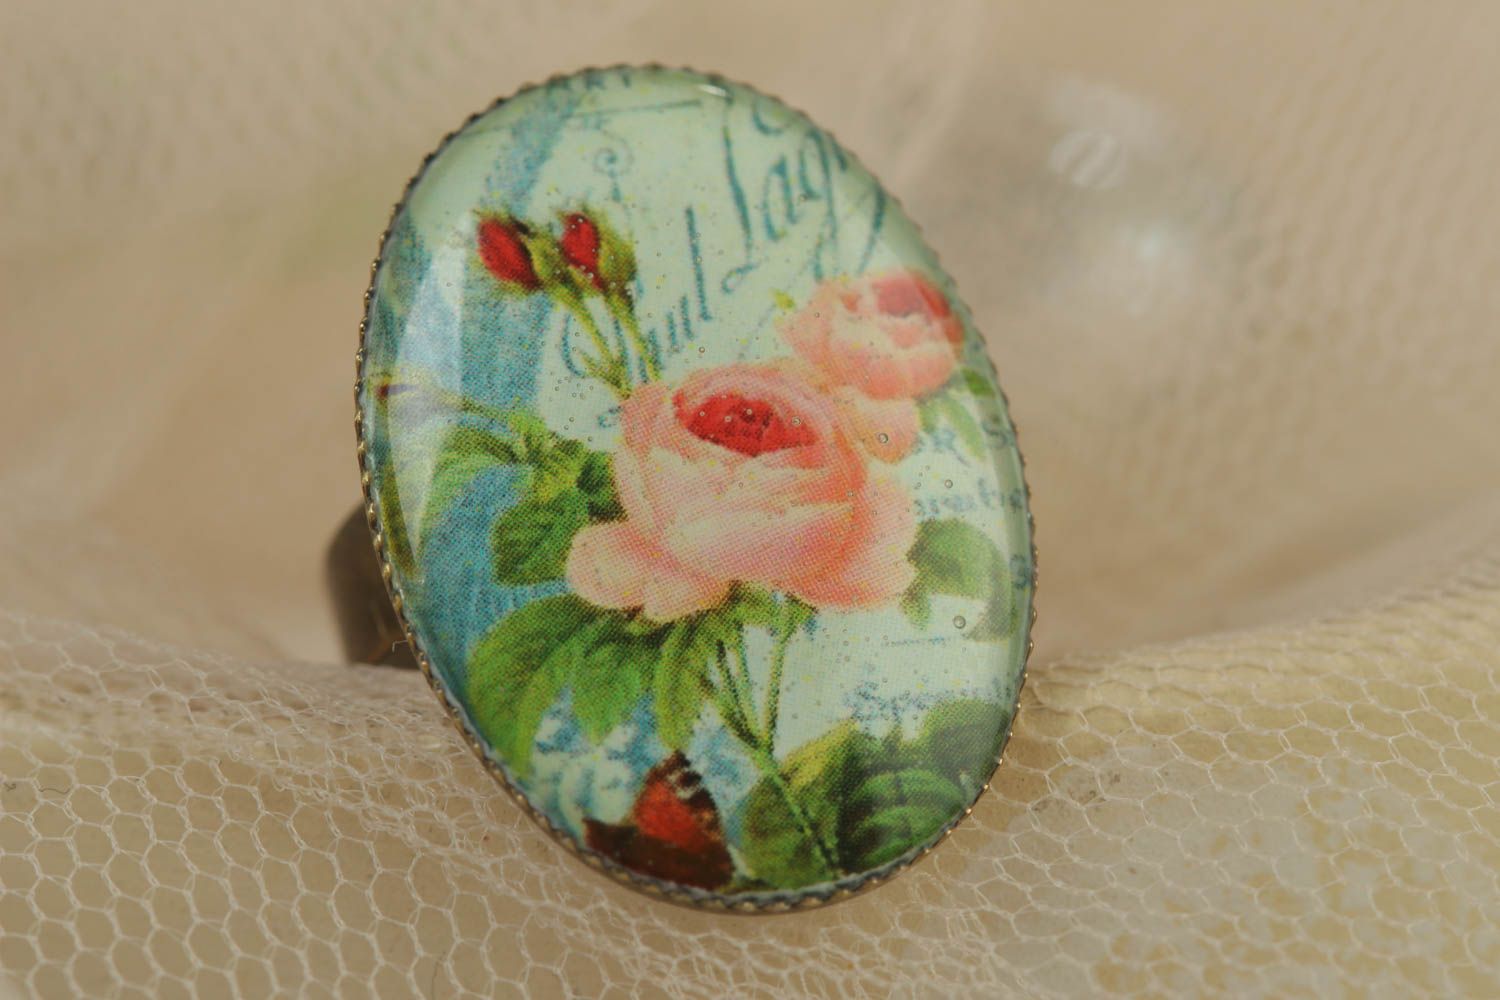 Handmade jewelry ring with metal basis and rose image coated with glass glaze photo 1